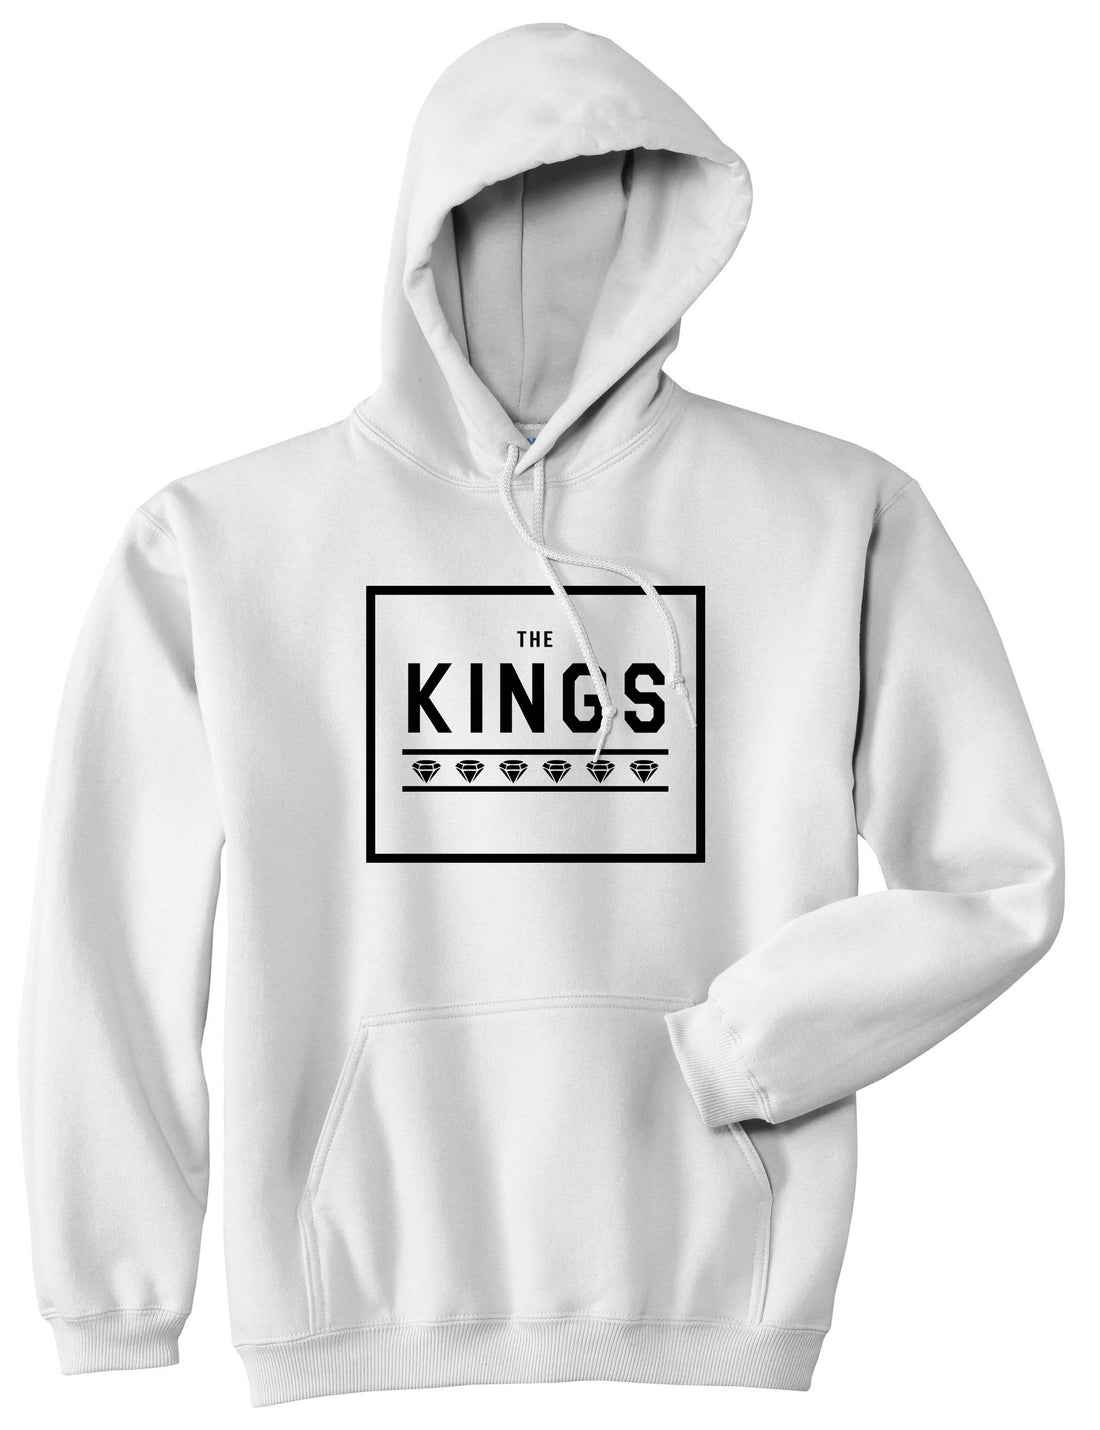 The Kings Diamonds Pullover Hoodie Hoody in White by Kings Of NY